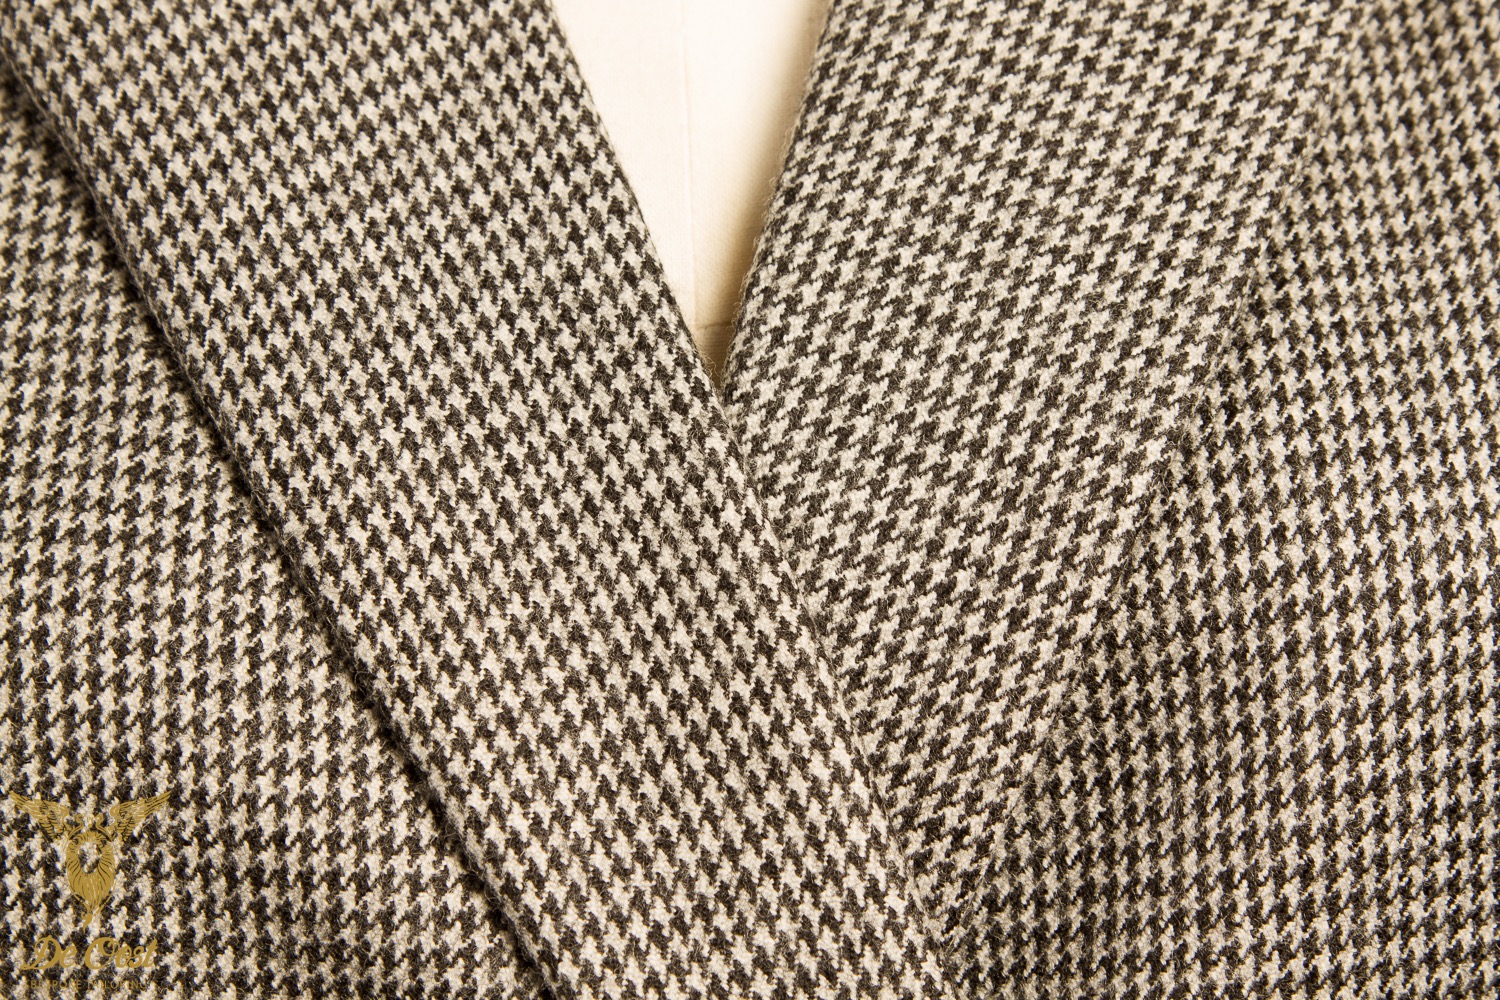 BESPOKE+DOUBLE+BREASTED+HOUNDSTOOTH+LADIES+JACKET+WITH+NOTCH+LAPELS+AND+BUTTONLESS+CUFFS+Amsterdam.jpg